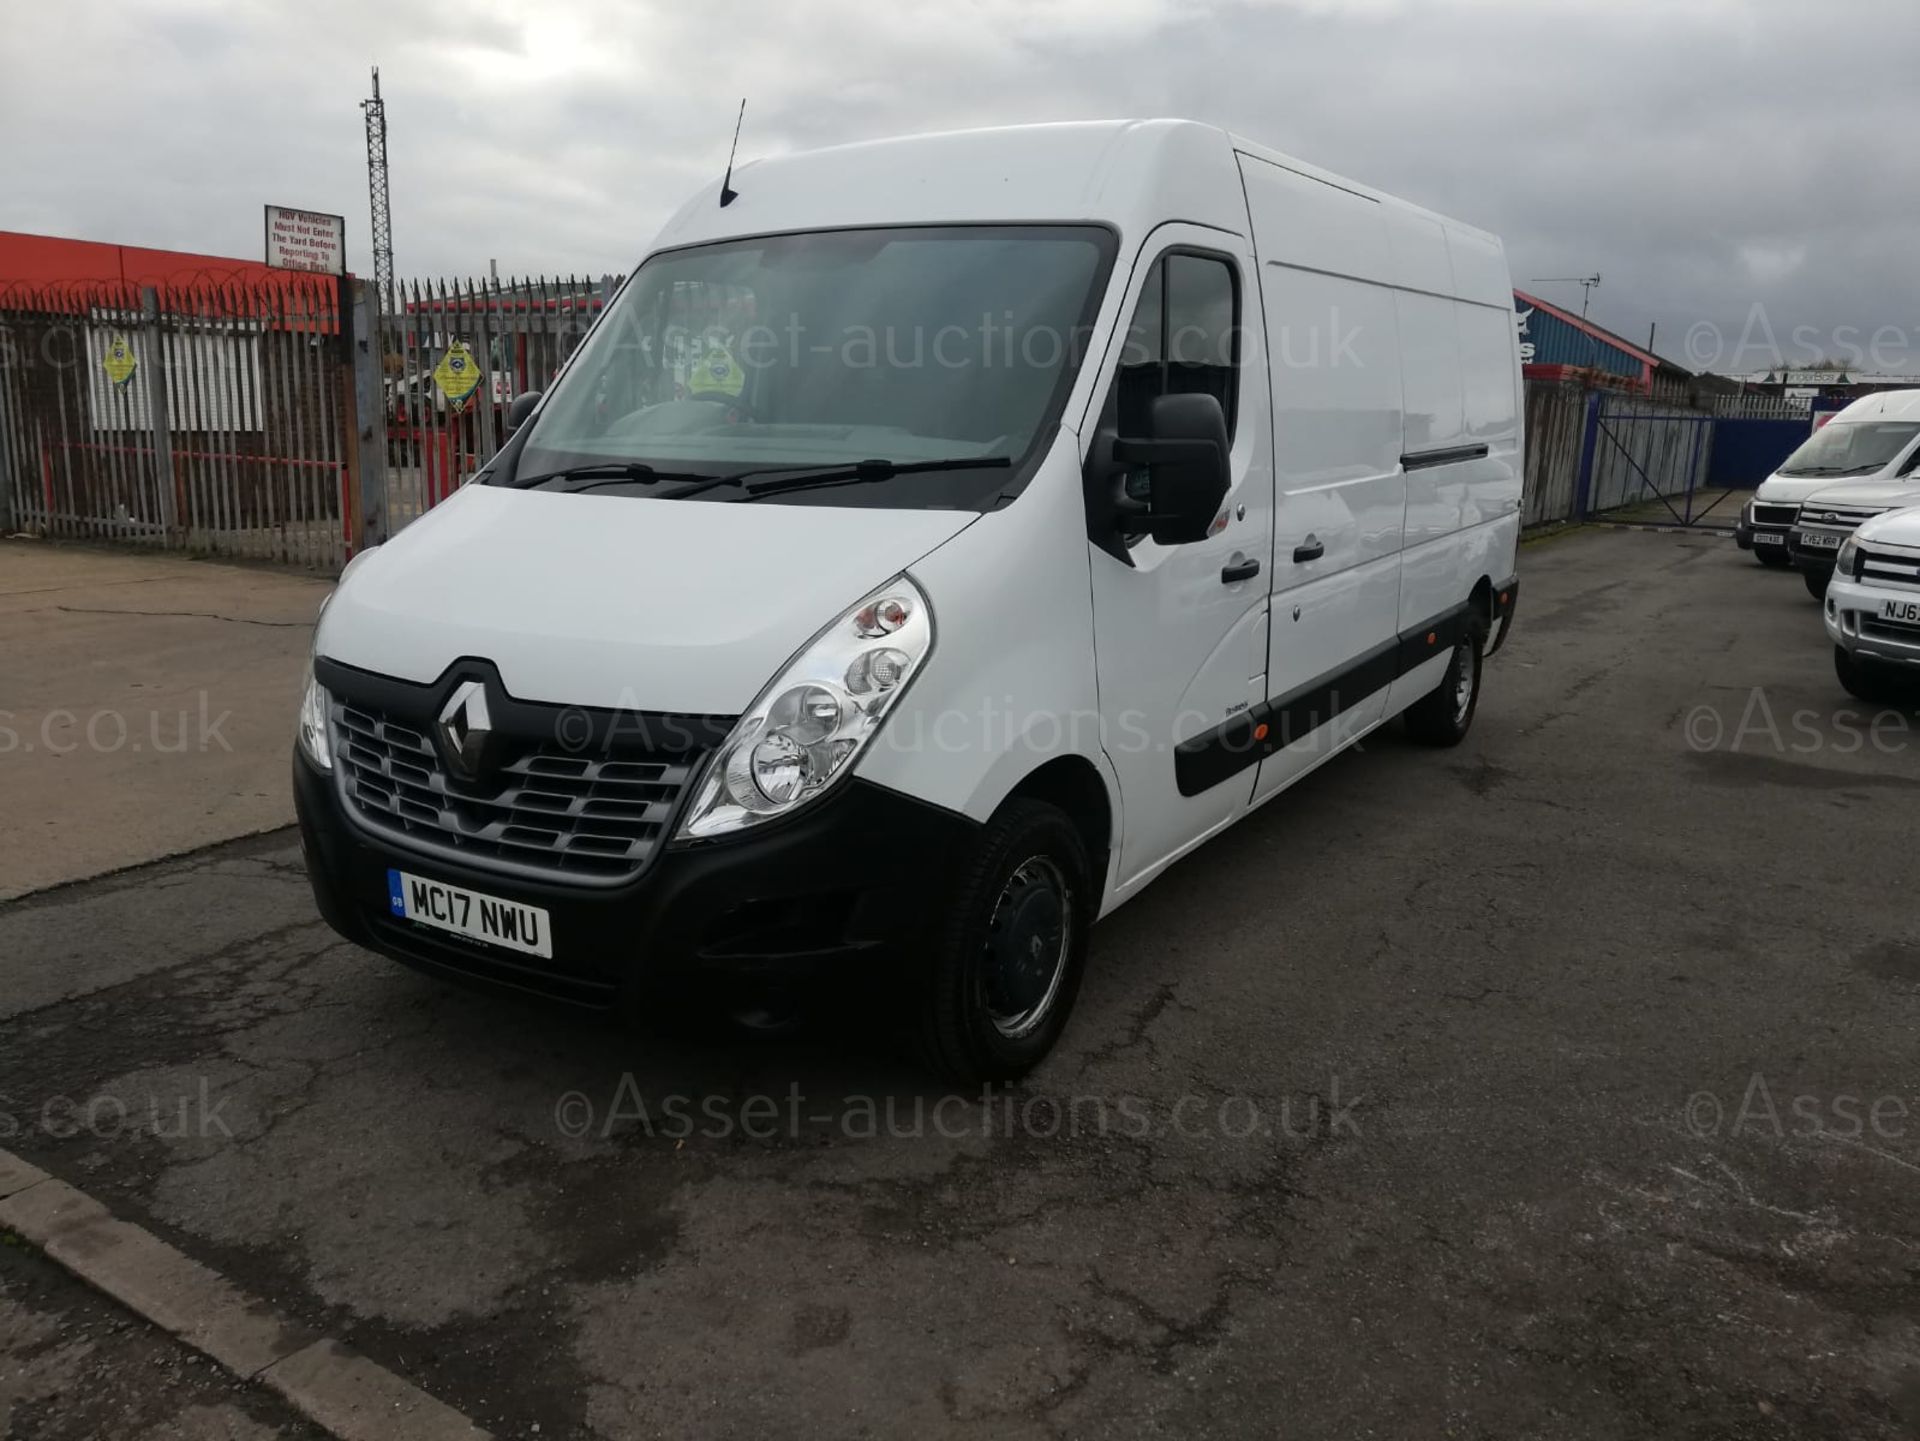 2017/17 RENAULT MASTER LM35 BUSINESS DCI L3H2 WHITE PANEL VAN, 106K MILES WITH SERVICE HISTORY - Image 3 of 9